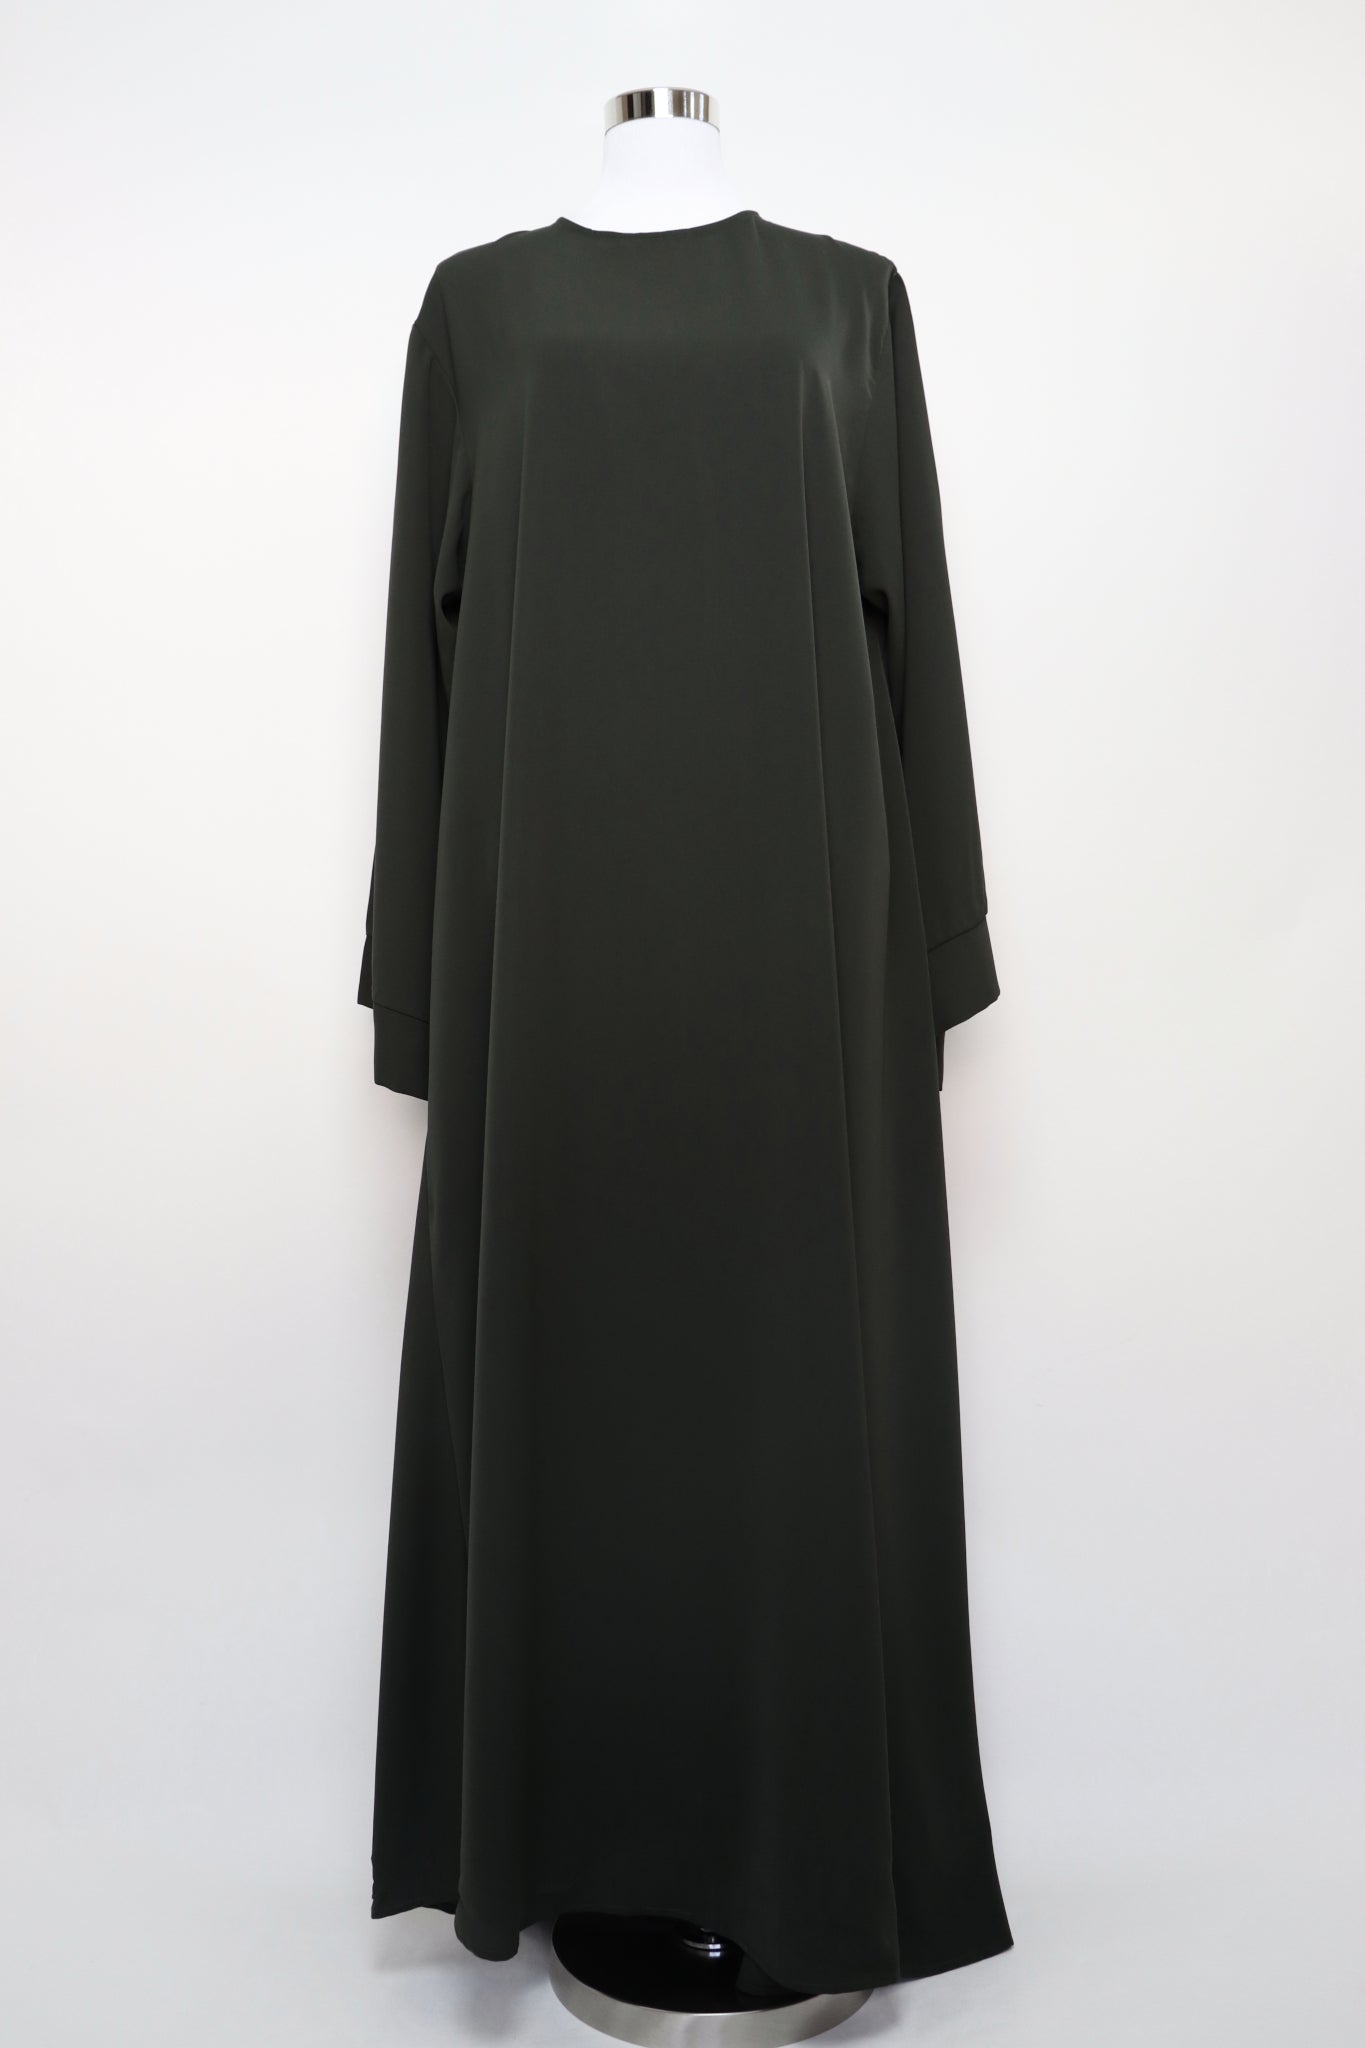 Classic Closed Flare Abaya Wide Sleeves - Deep Olive